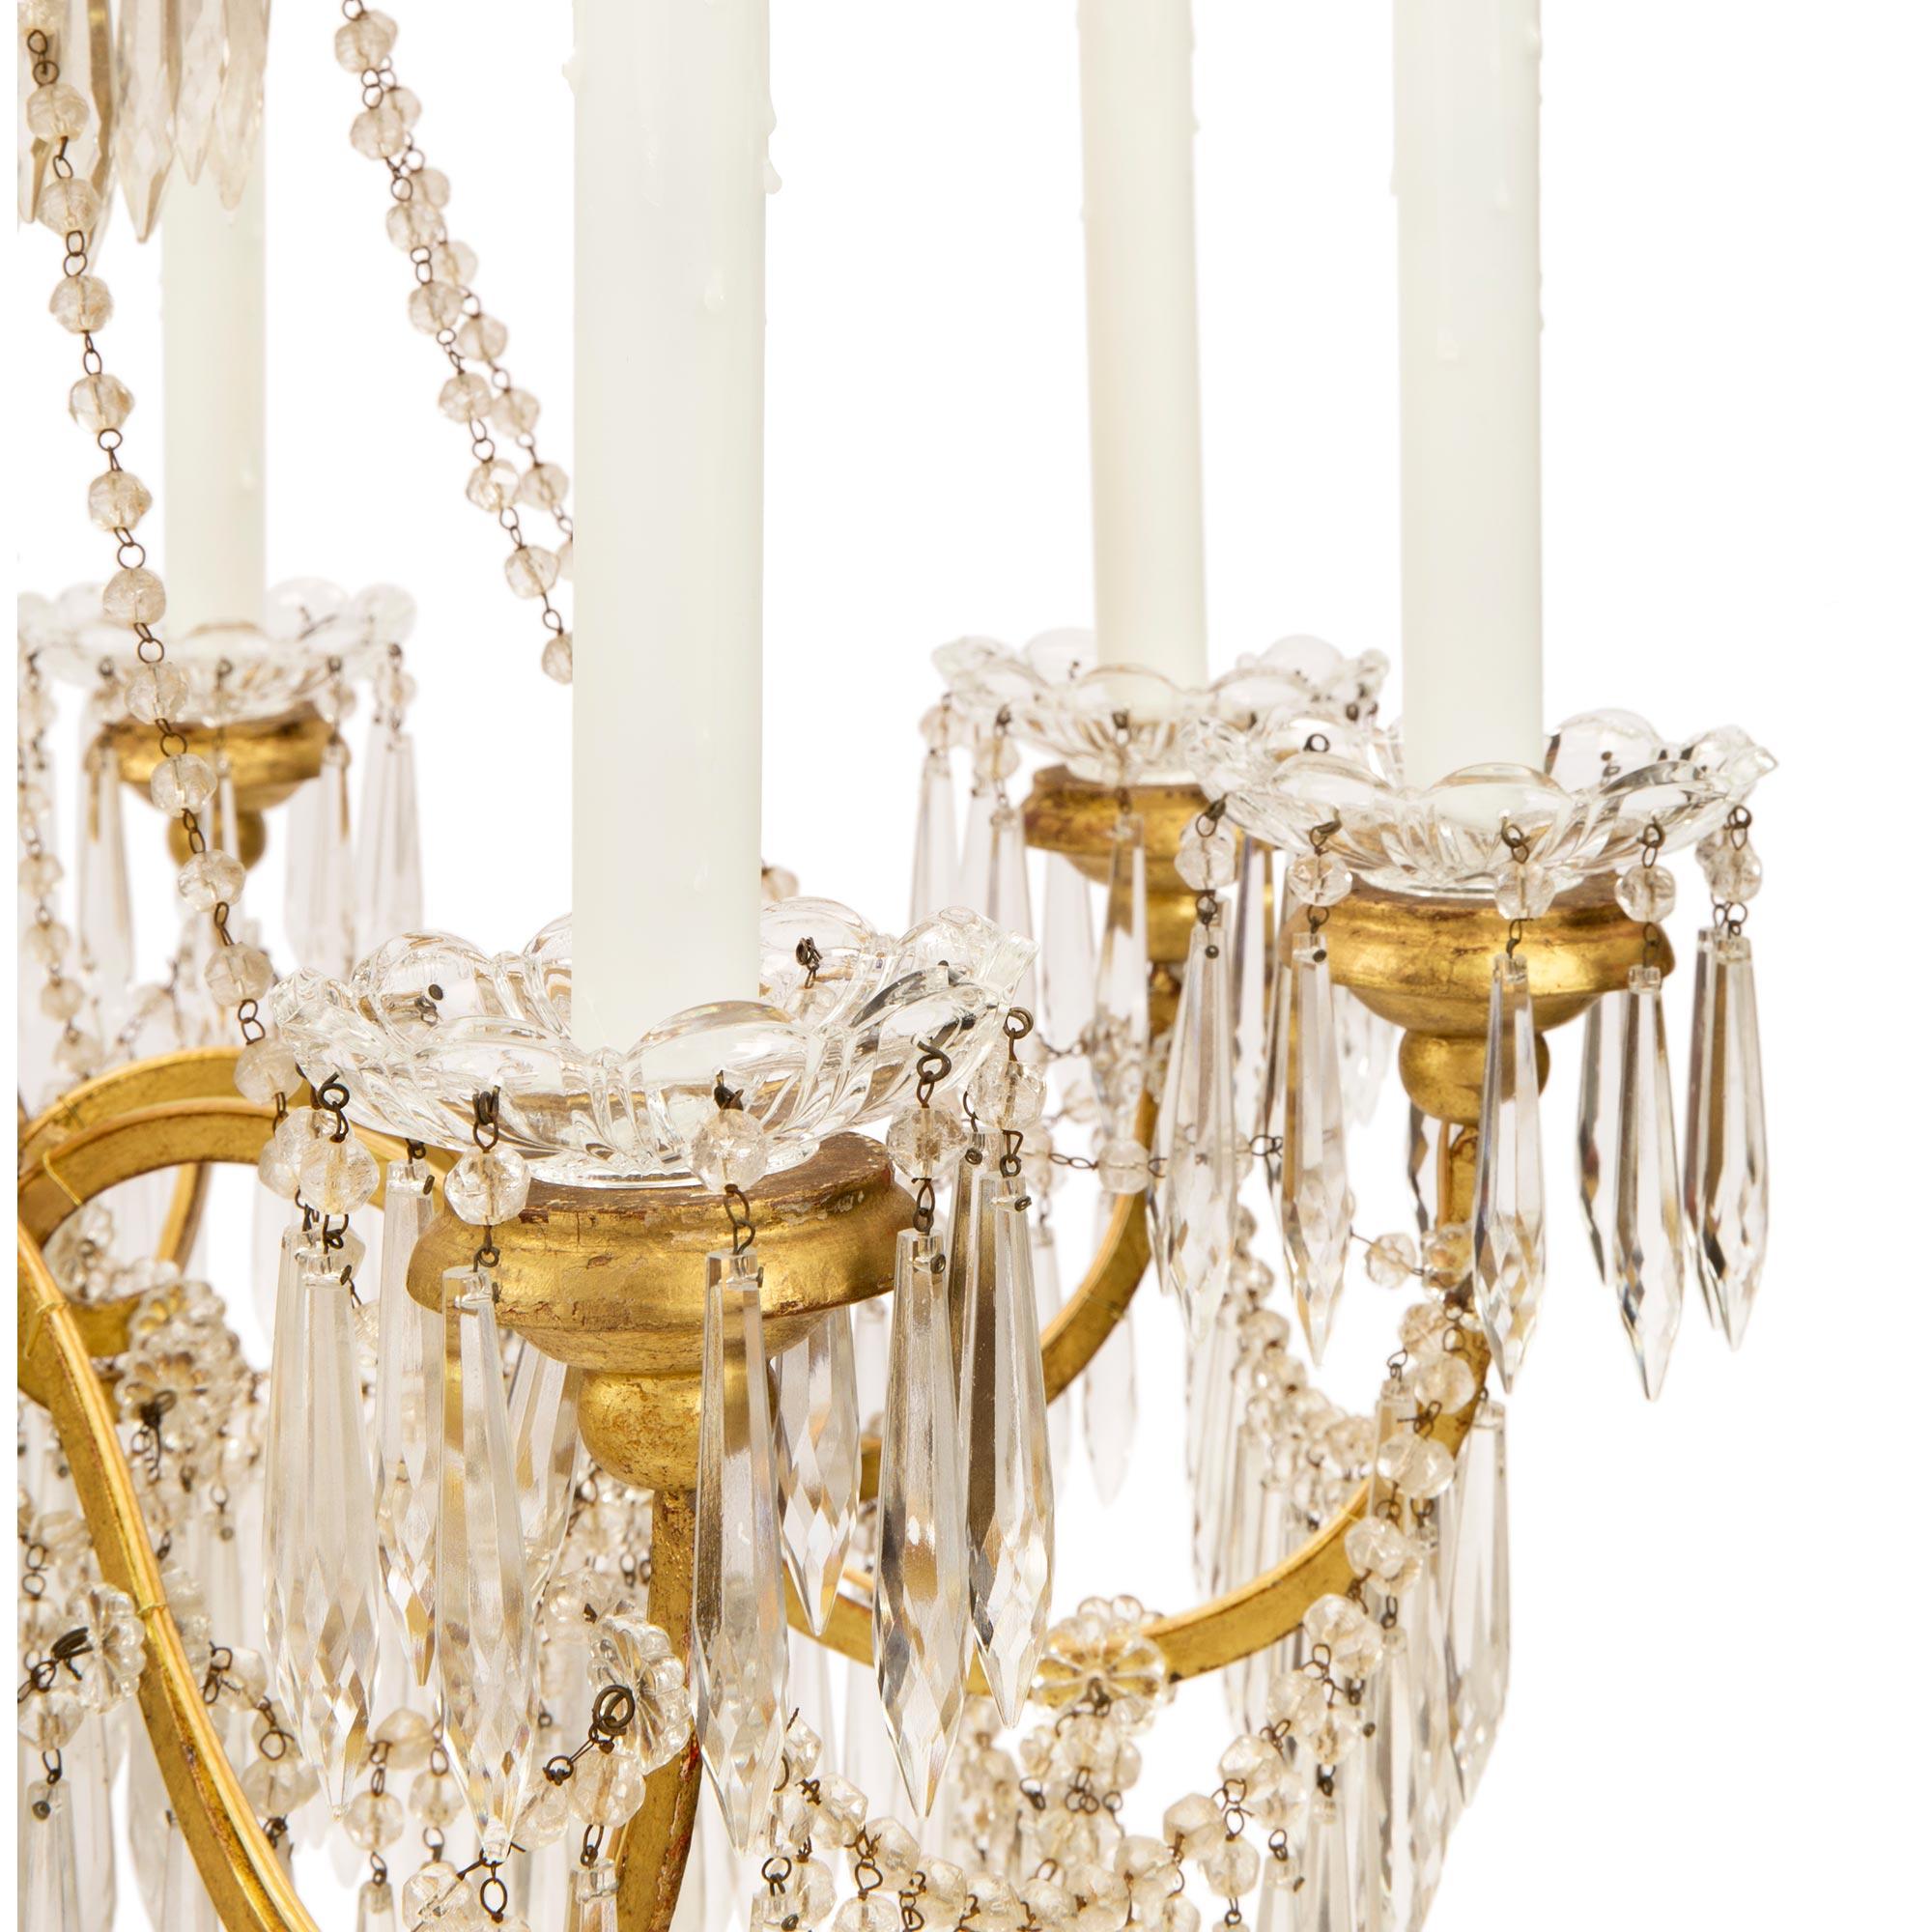 Italian 19th Century Louis XVI Style Giltwood, Metal and Crystal Chandelier For Sale 1